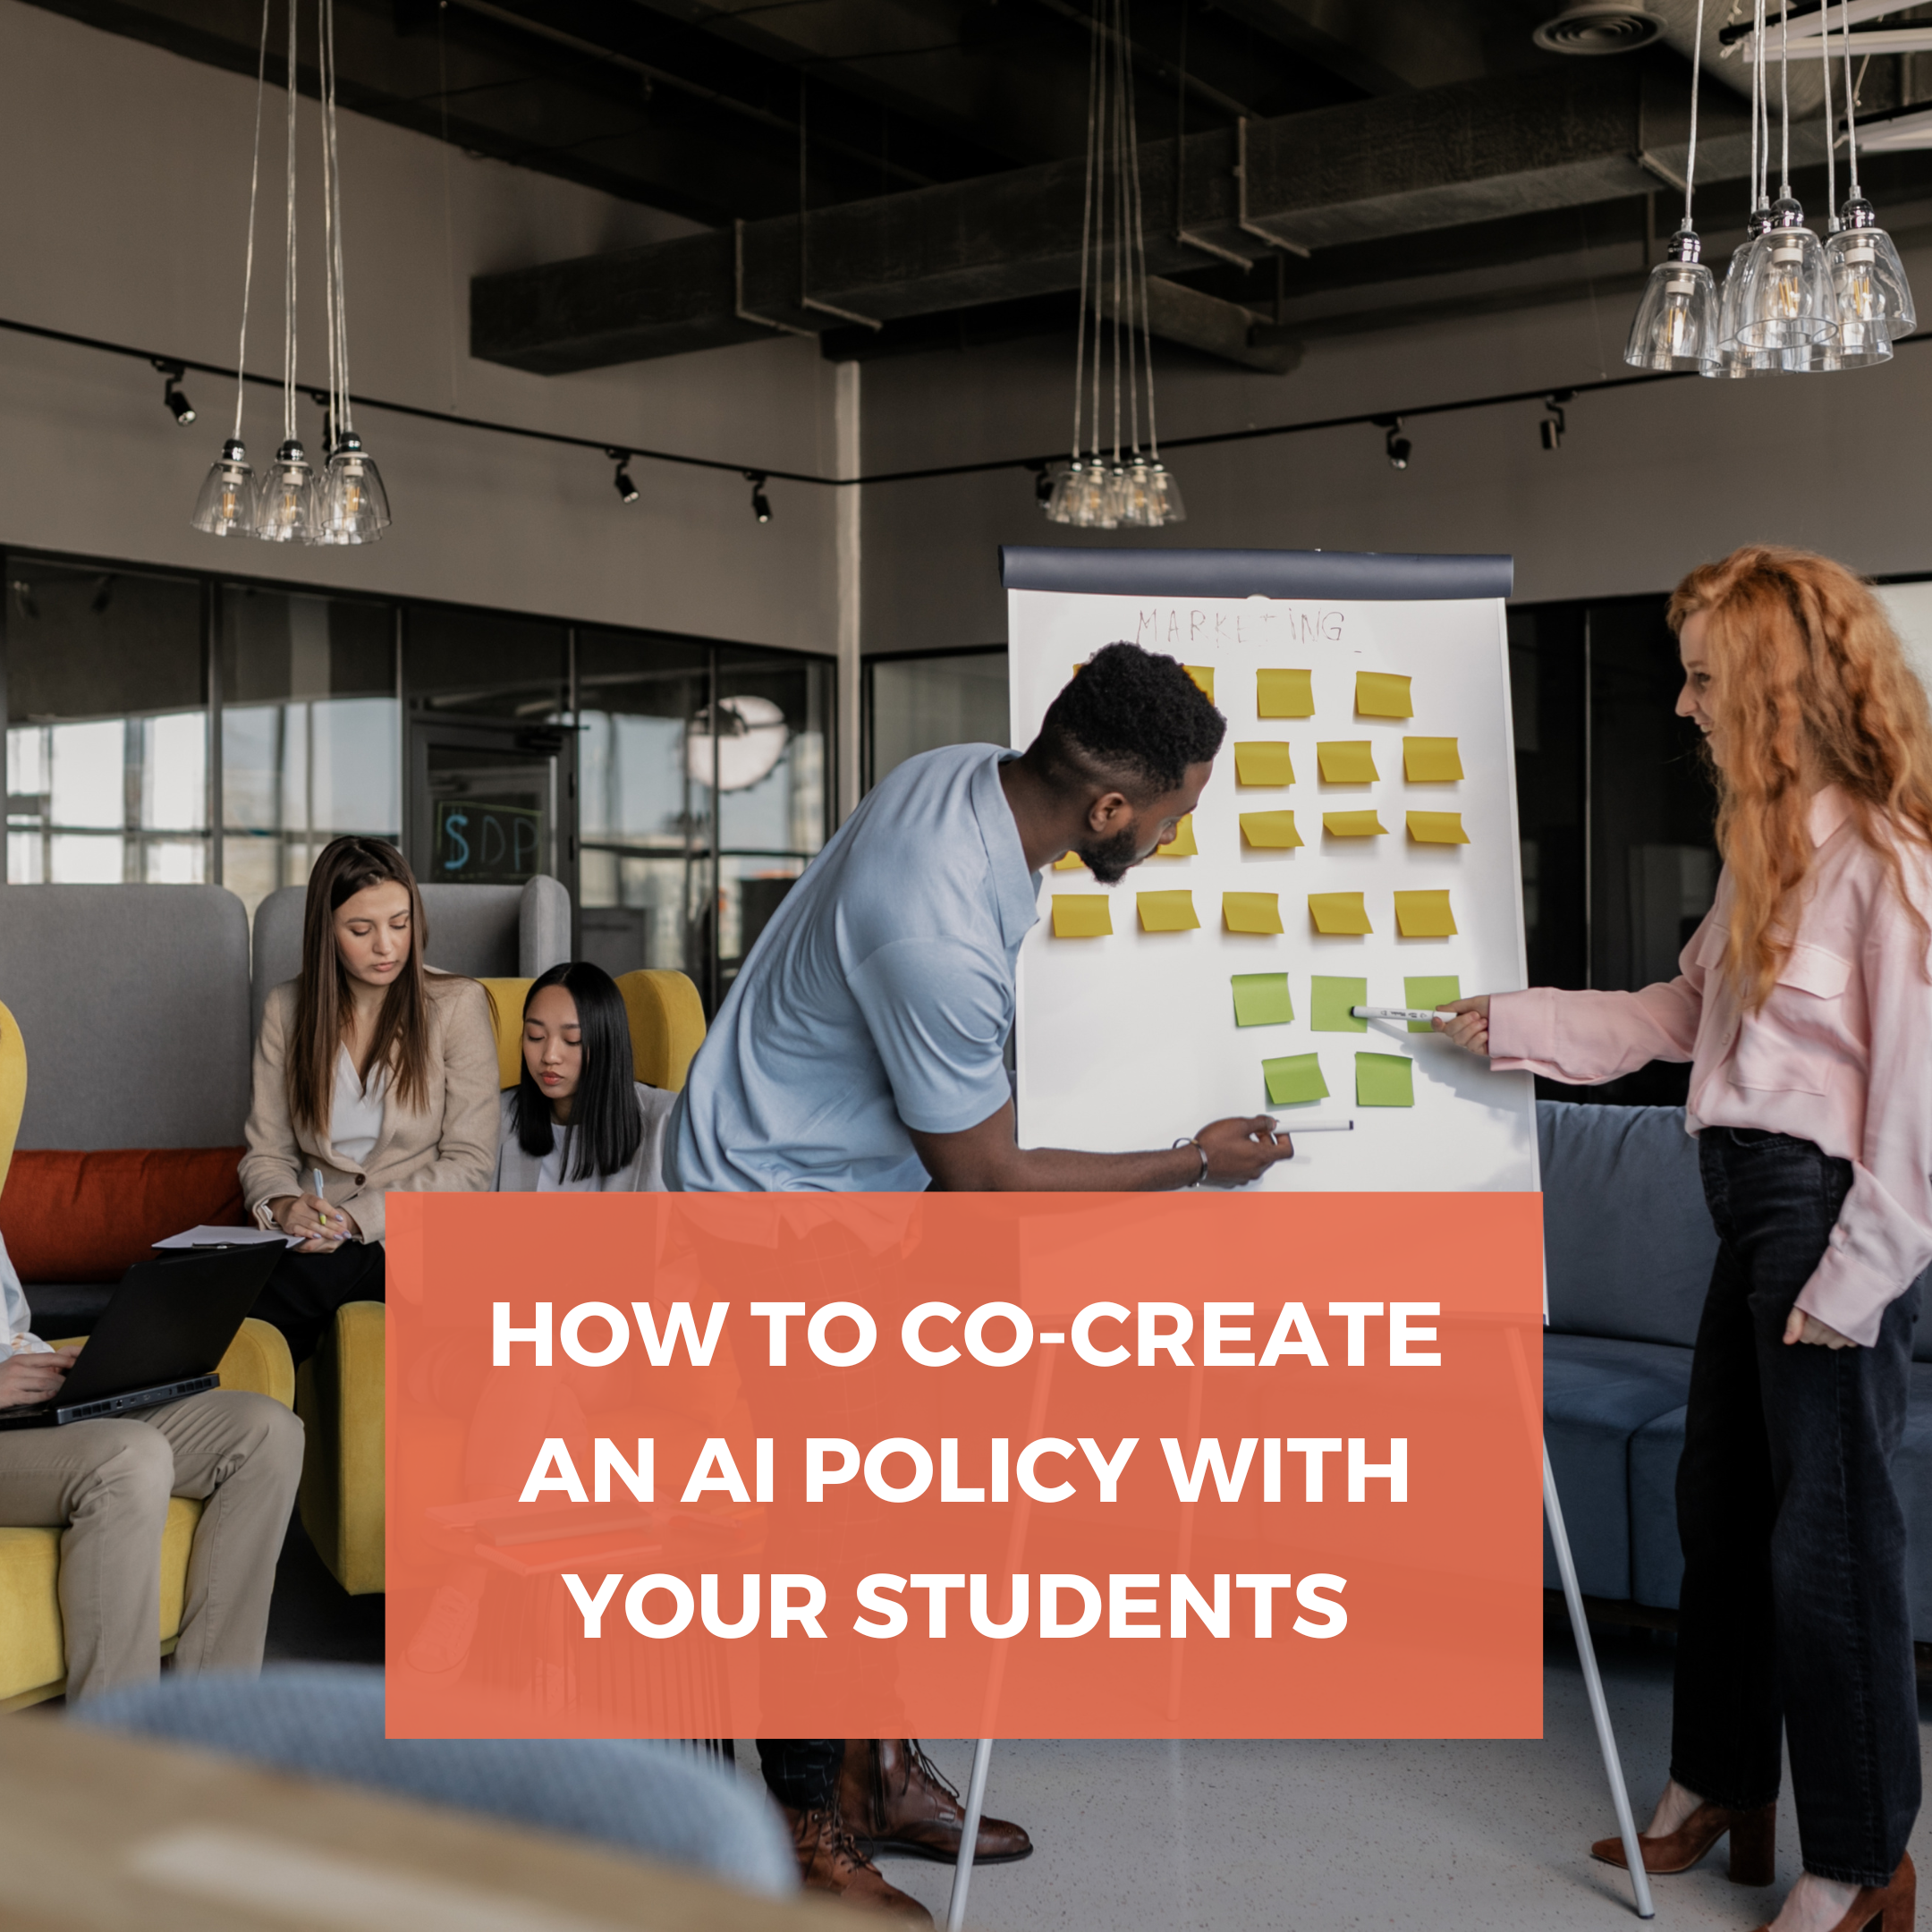 Co-Creating AI Policies with Students using Design Thinking